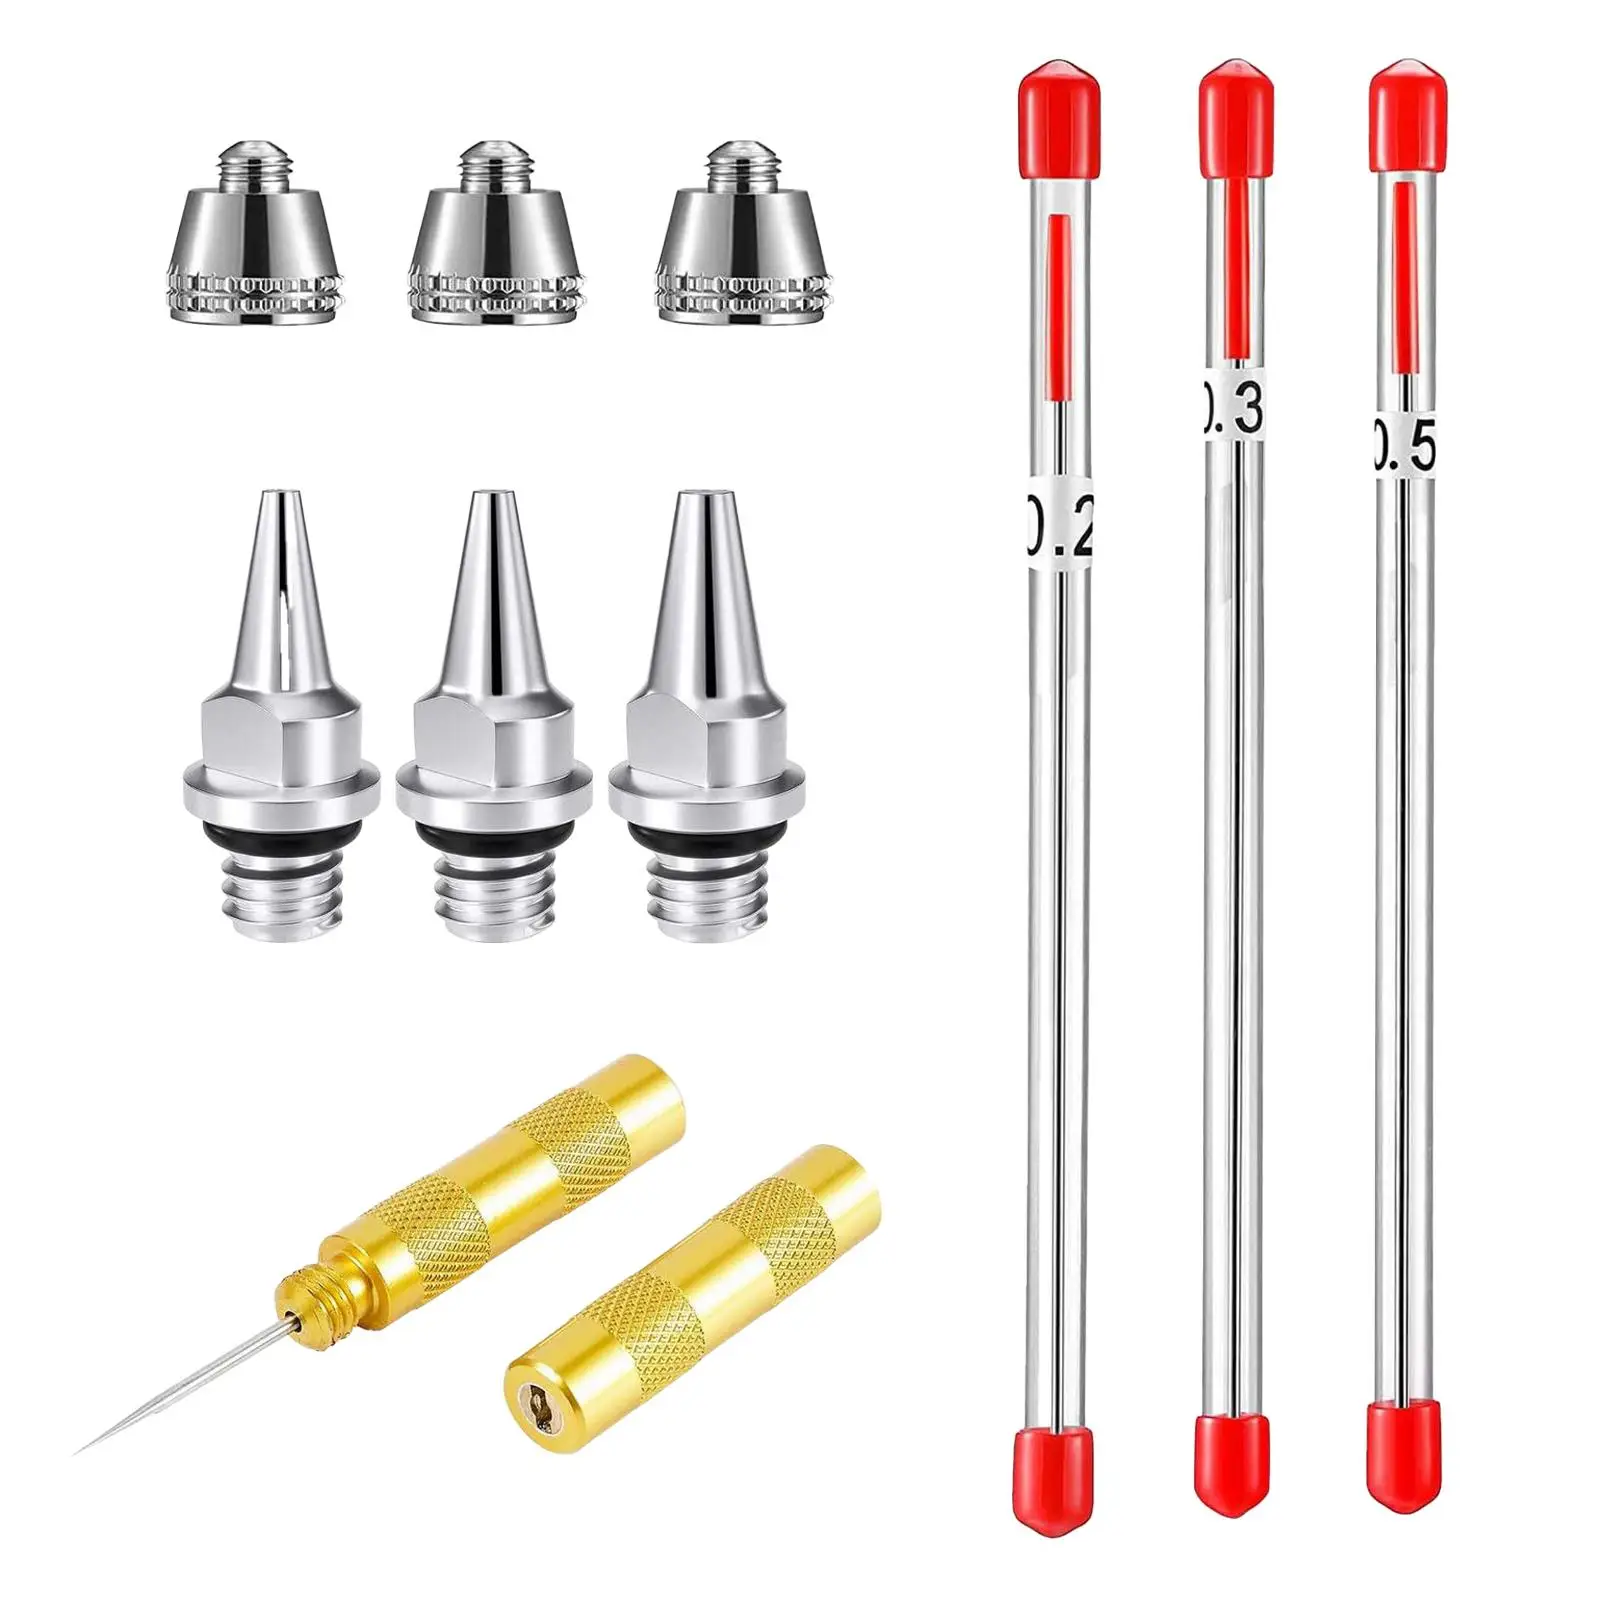 Airbrush Repair Tool Painting Supplies Metal Spray Needle for Remove Nozzle Paint Dirty Auto Parts Cleaning Cleaning Thin Tubes